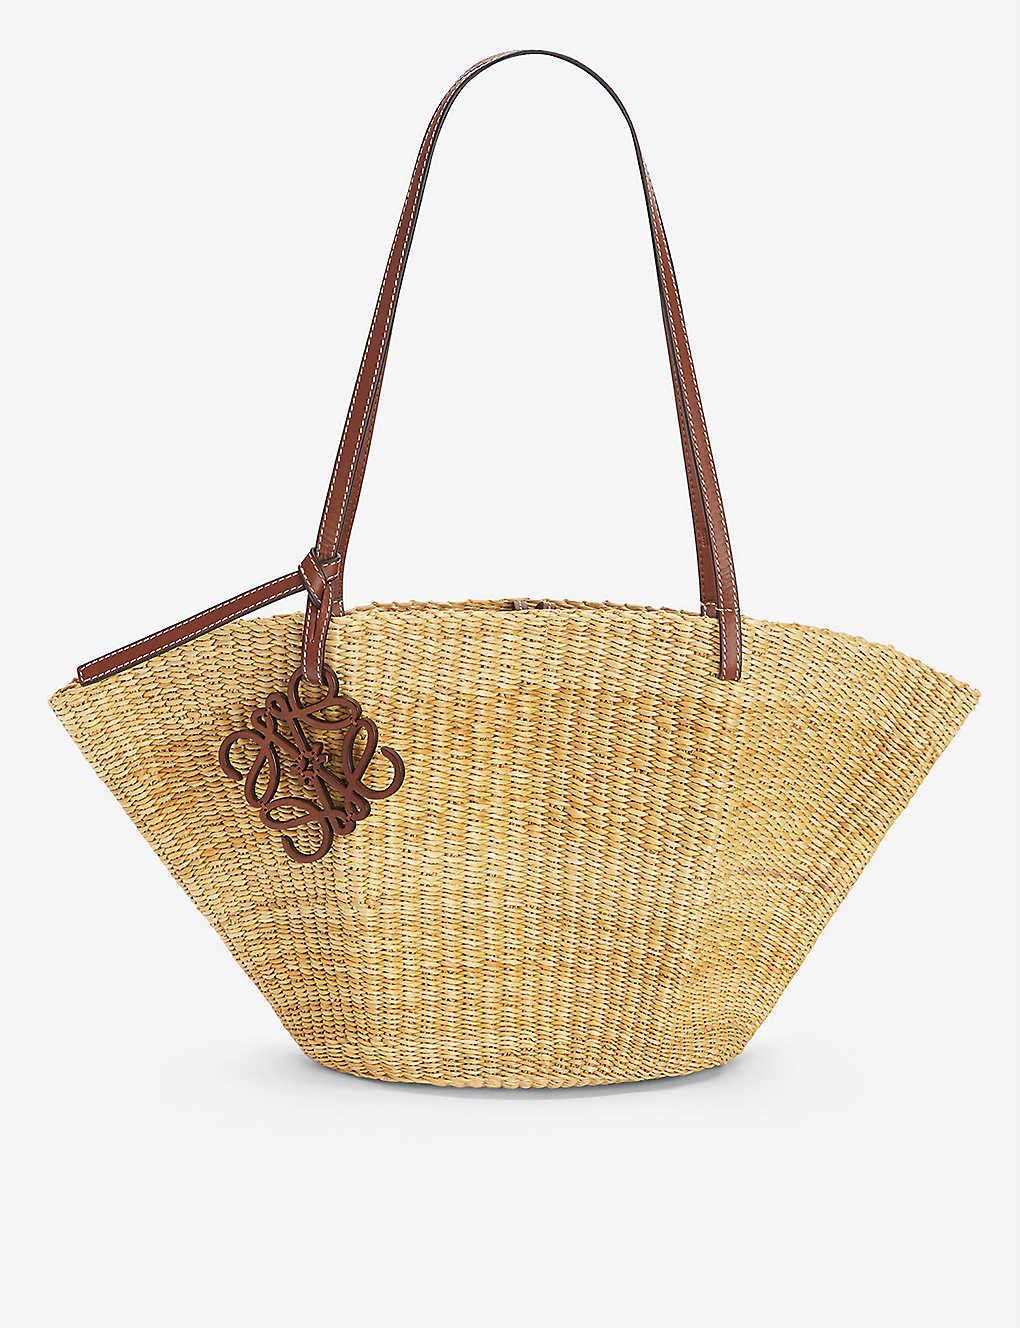 Shell small elephant grass and leather basket bag(9168390)